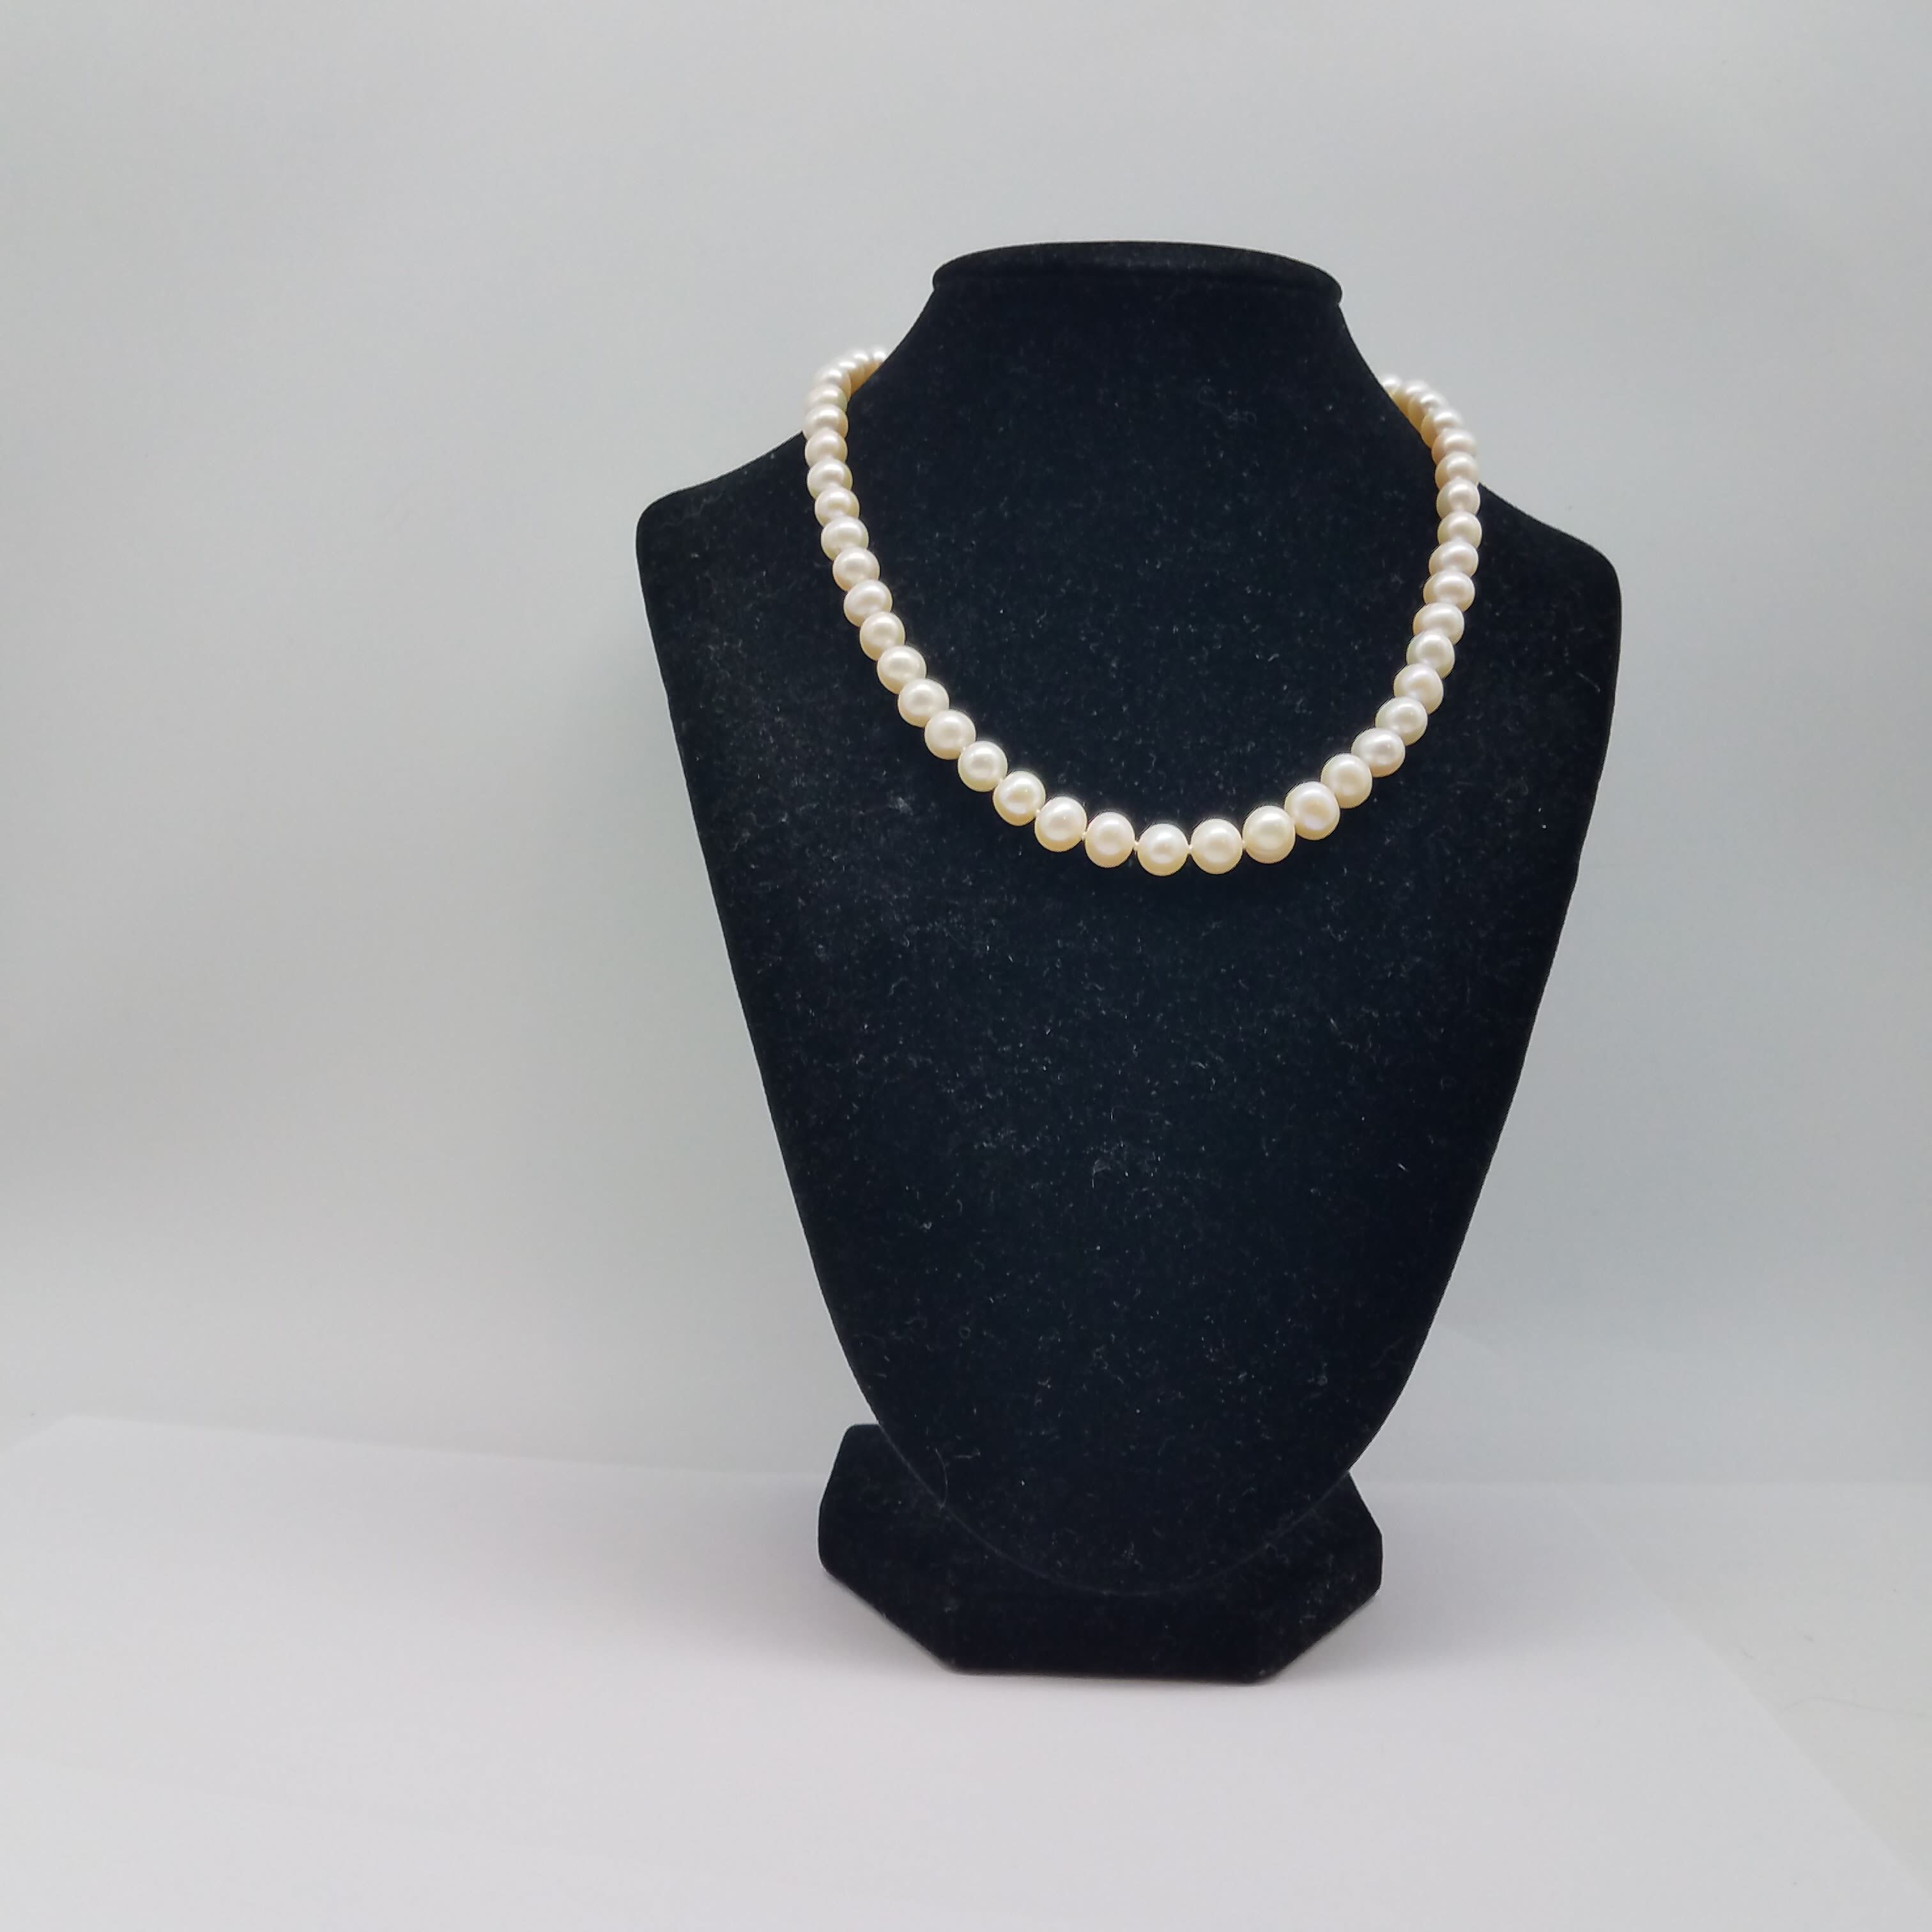 Buy Multi Color Cultured Pearl Necklace, Long Square Shape Pearl Necklace,  20 Inch Necklace, Rhodium Over Sterling Silver Necklace (Del. in 10-15  Days) at ShopLC.